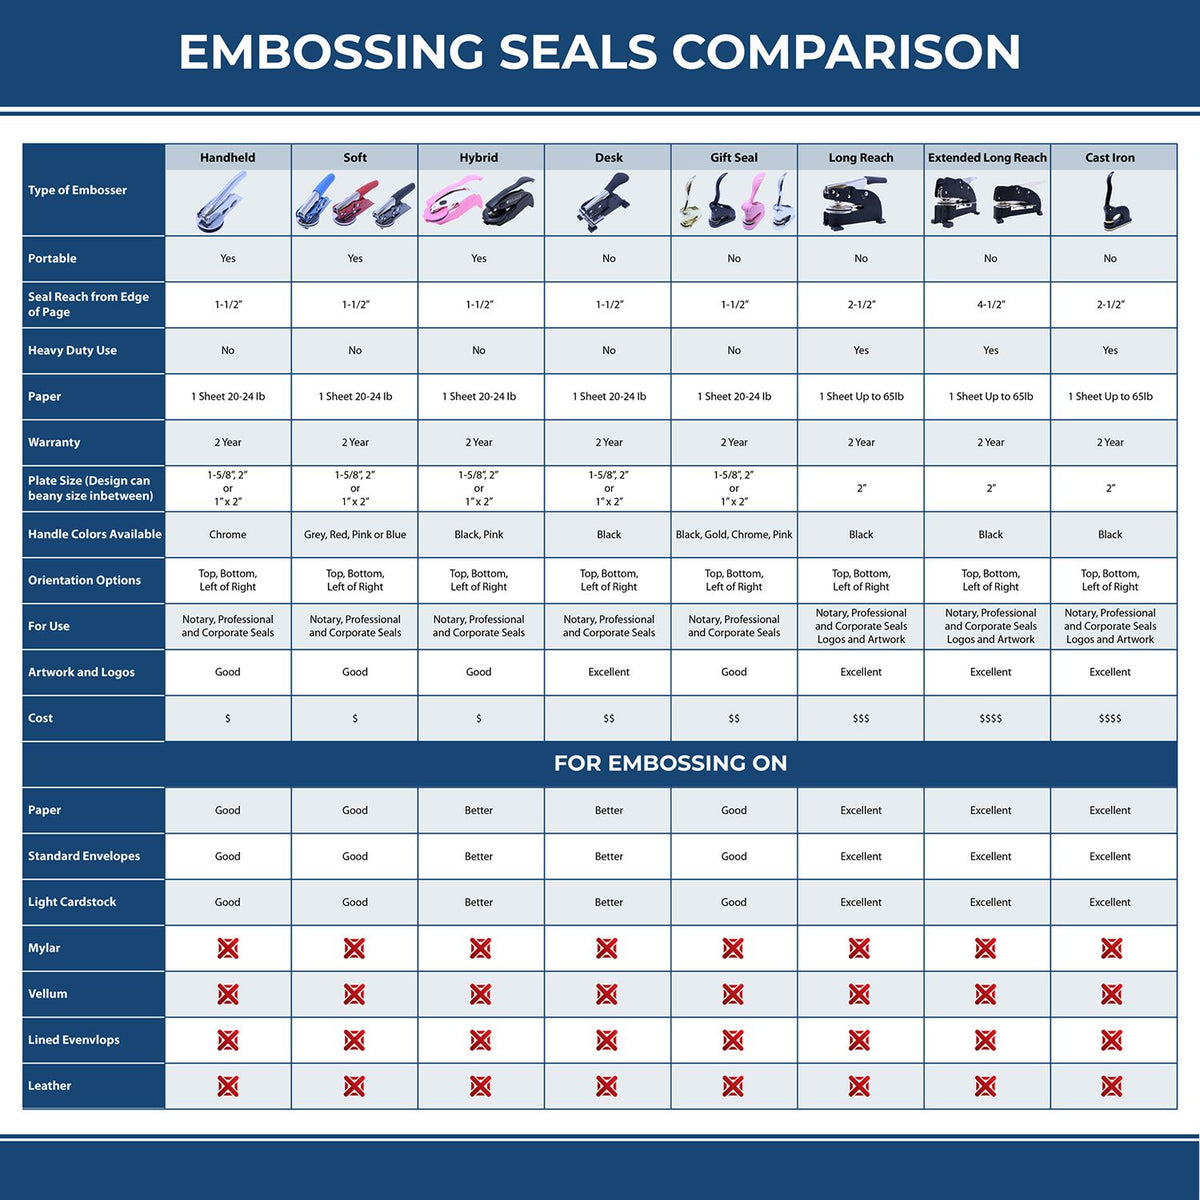 A comparison chart for the different types of mount models available for the State of Louisiana Extended Long Reach Geologist Seal